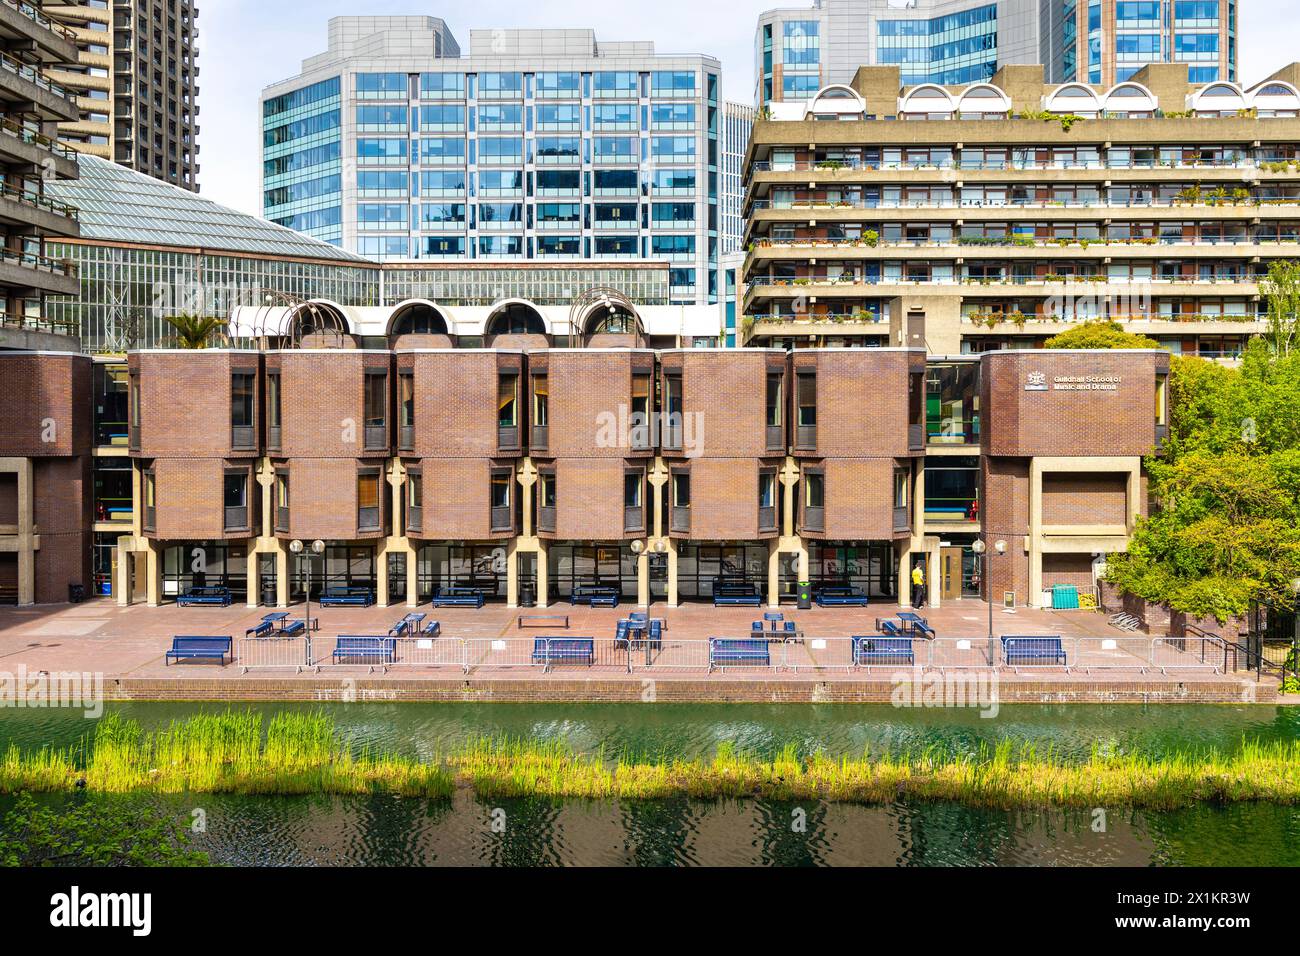 Exterior of the Guildhall School of Music and Drama at the Barbican Estate, London, England Stock Photo